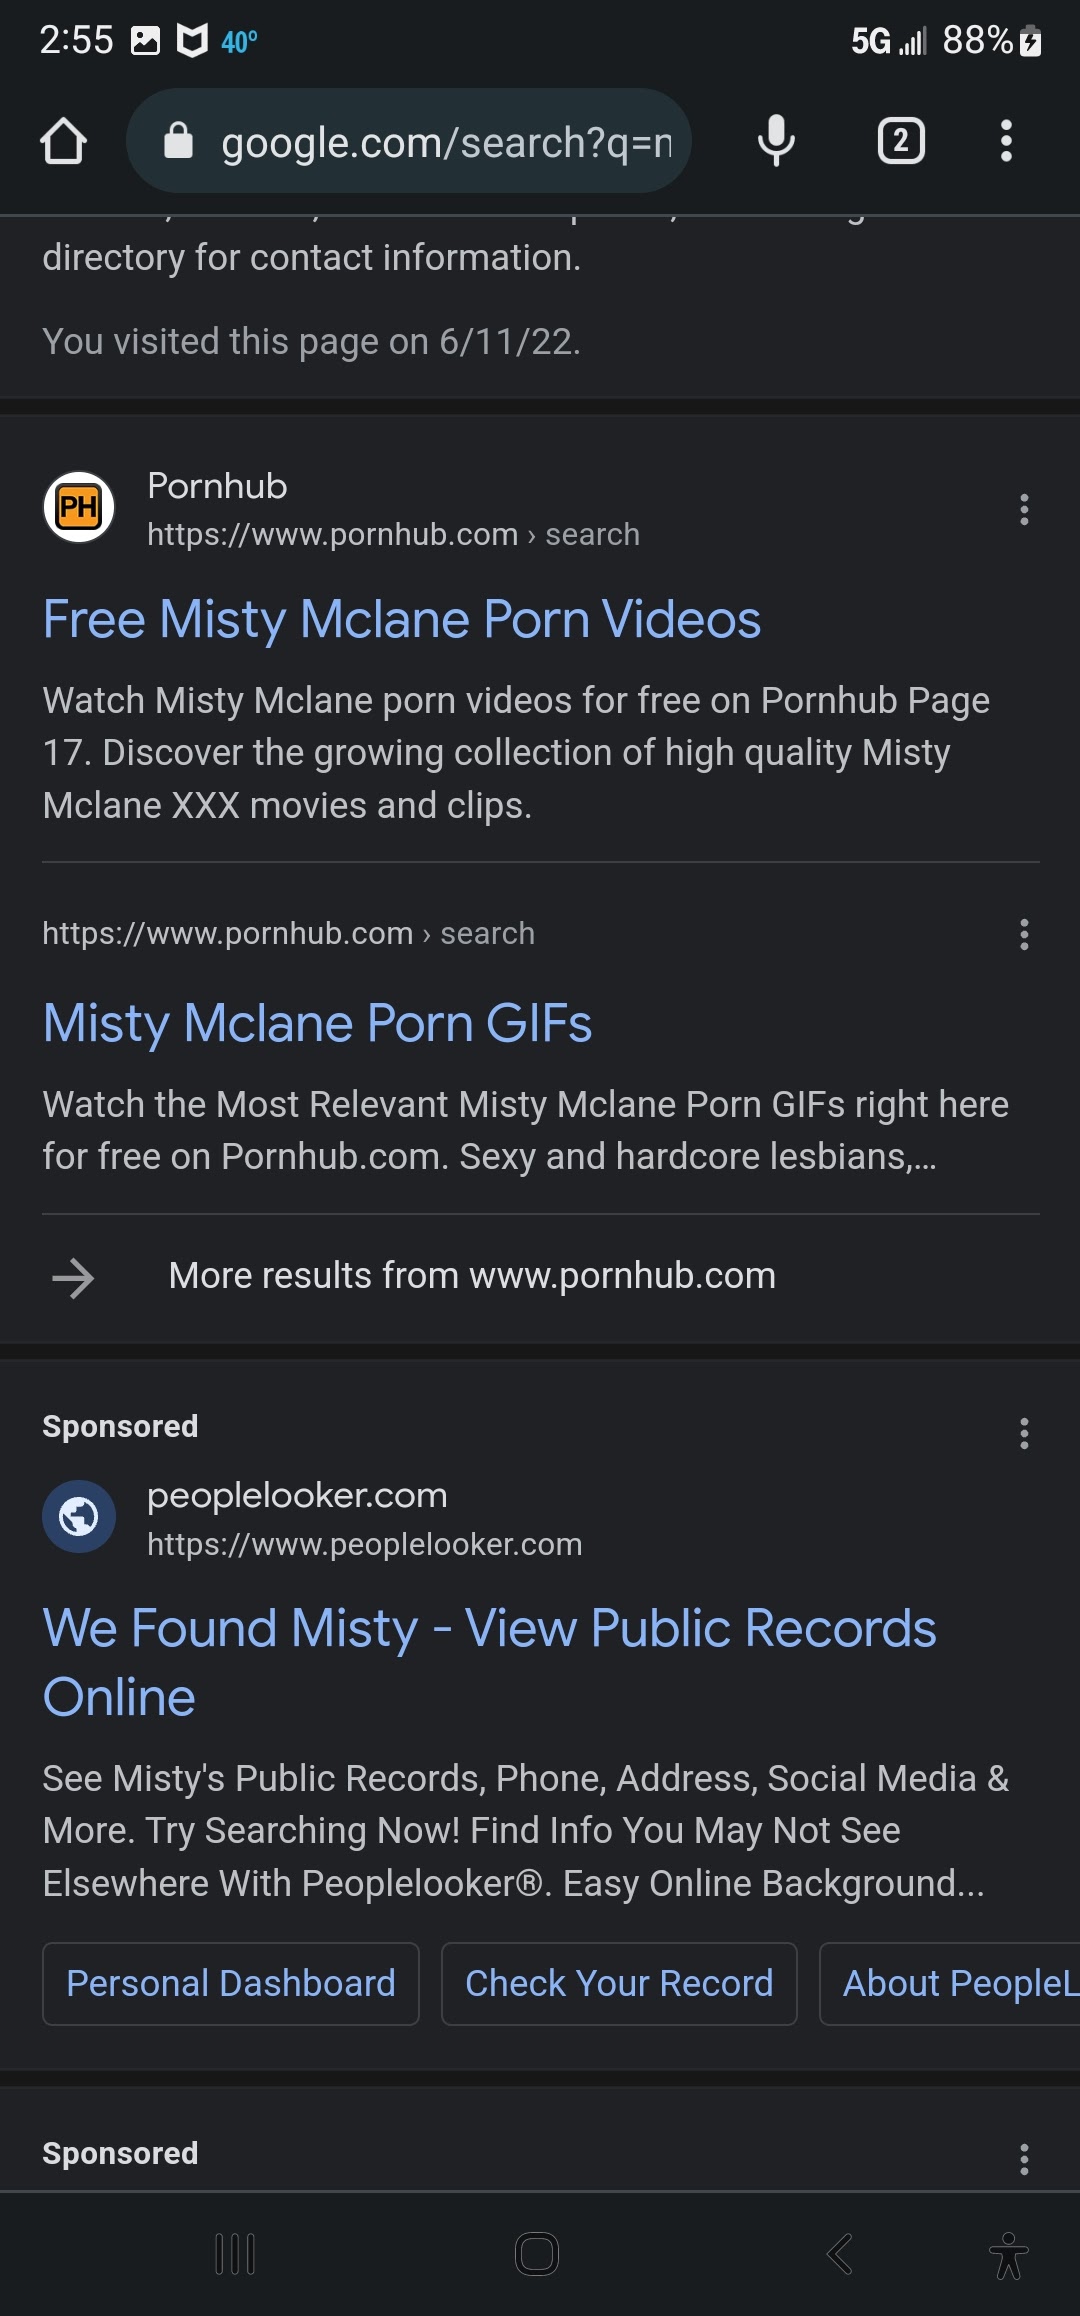 My name pulls me up on porn sites that I'm not on - Google Search Community